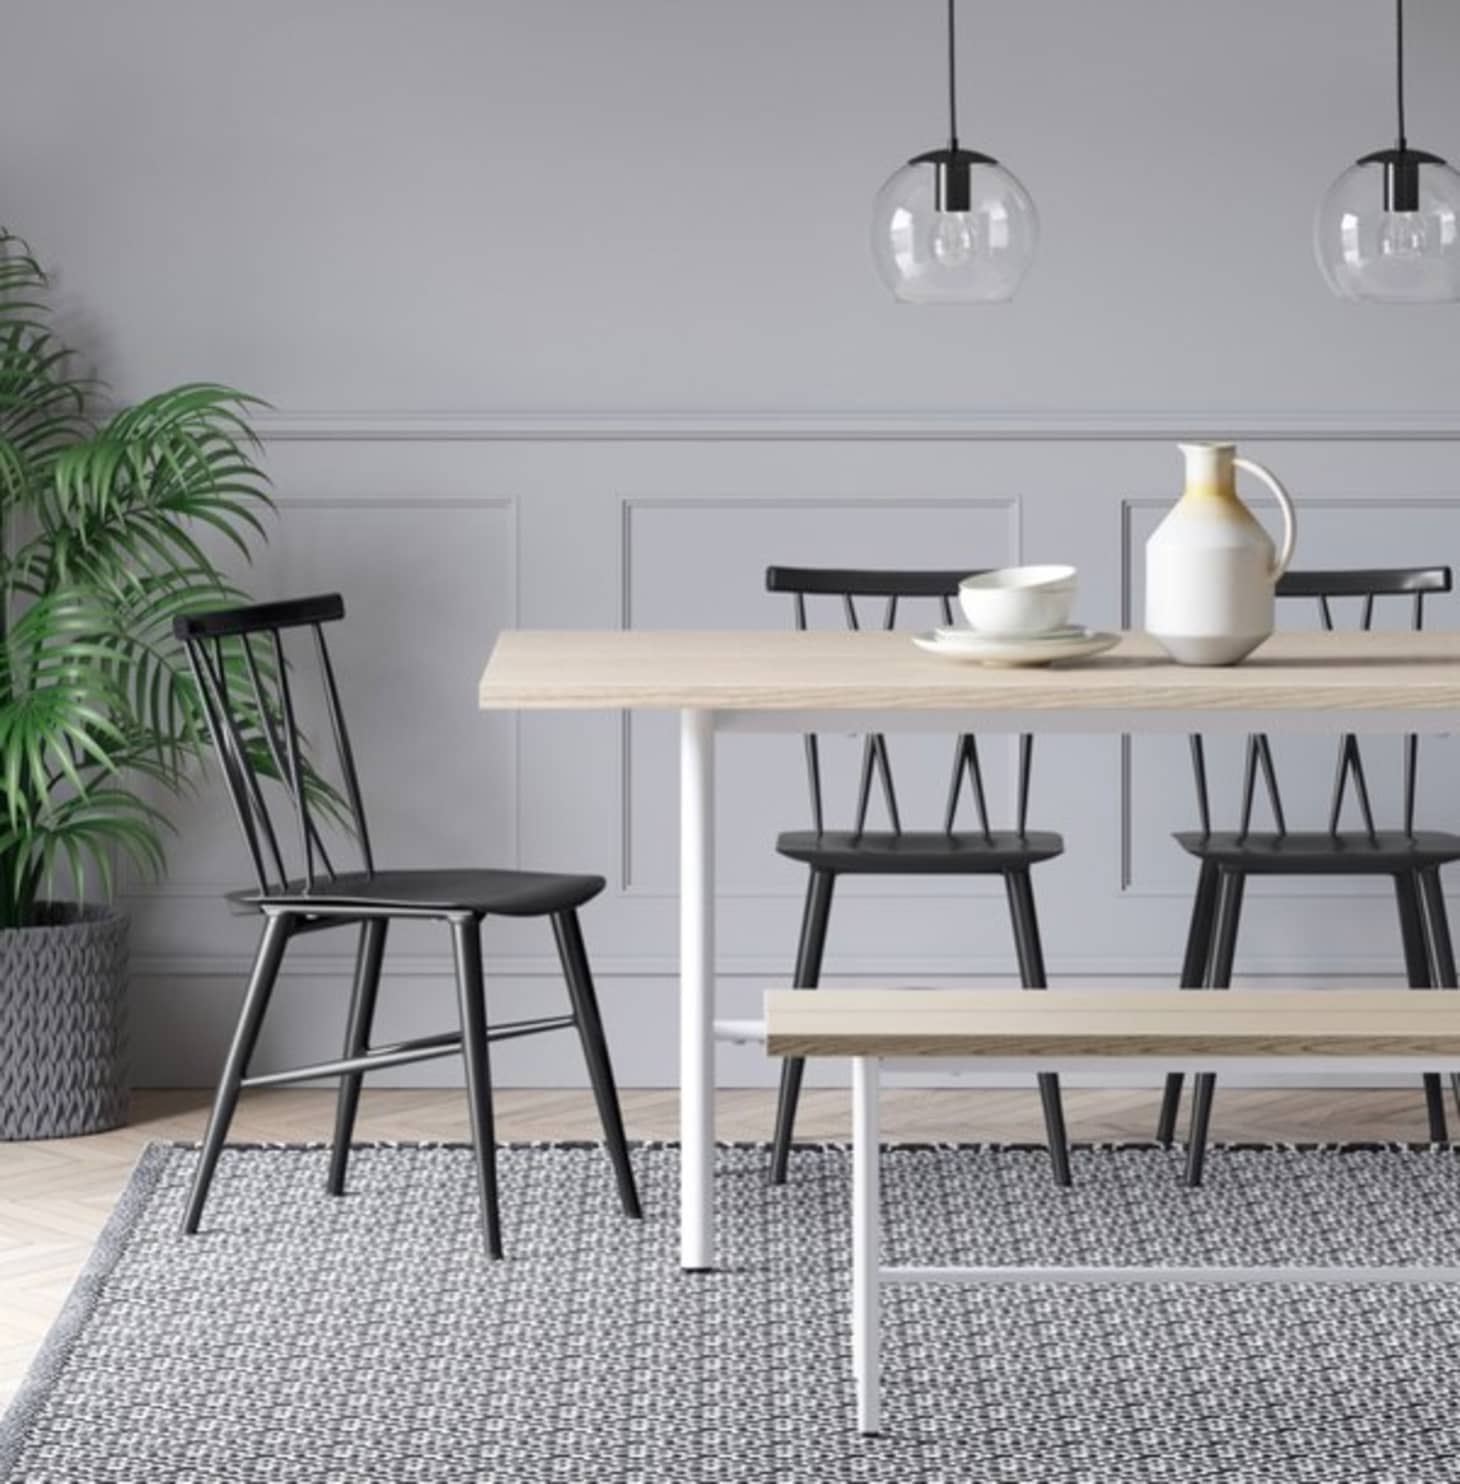 Target Dining Chair Stool Sale Home Deals April 2019